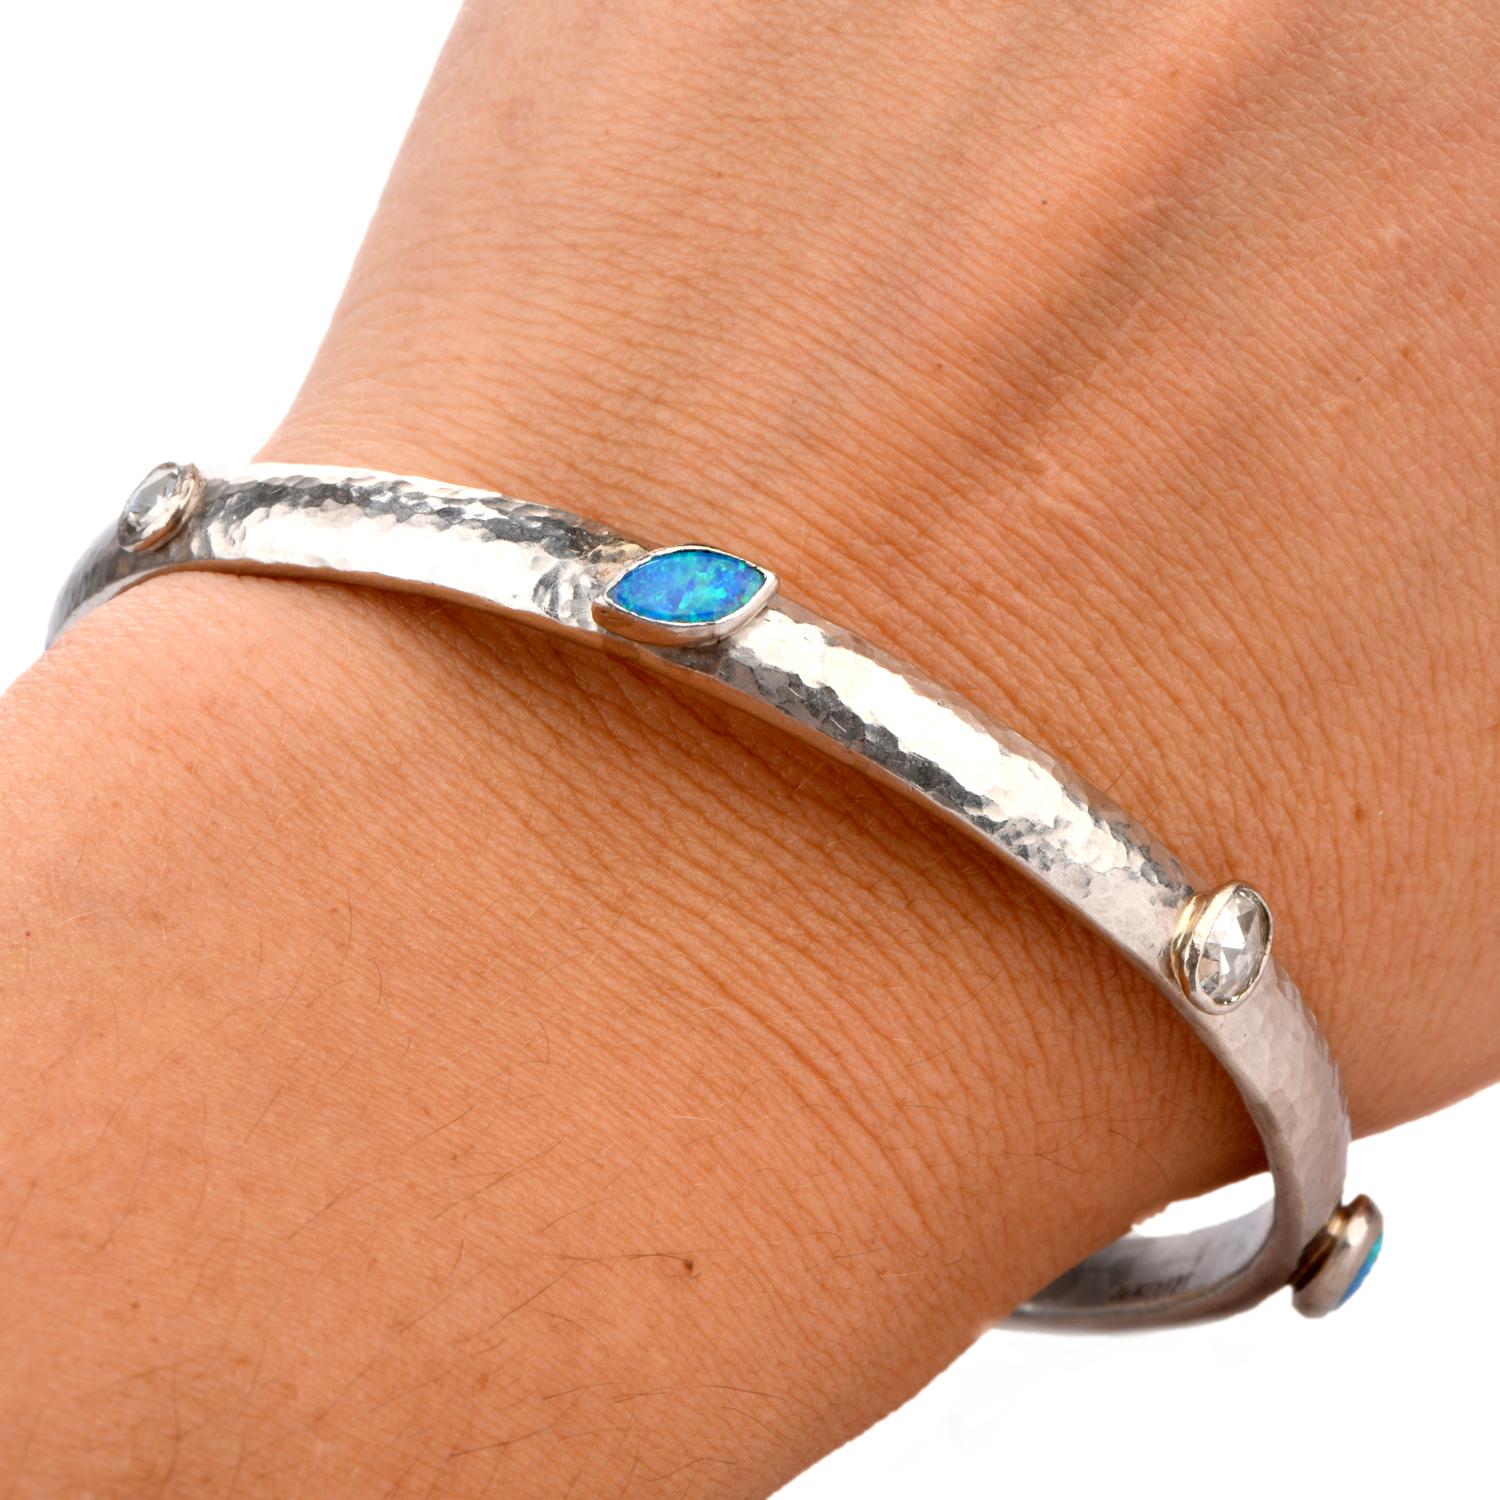 Add this Stackable Hand hammered  solid platinum Bangle bracelet to your collection.

Featuring a variety os shapes in both Rose cut Diamonds

and Opals create the highlights of this bracelet.

4 Opal stones weigh appx. 2.16 carats.

Diamonds